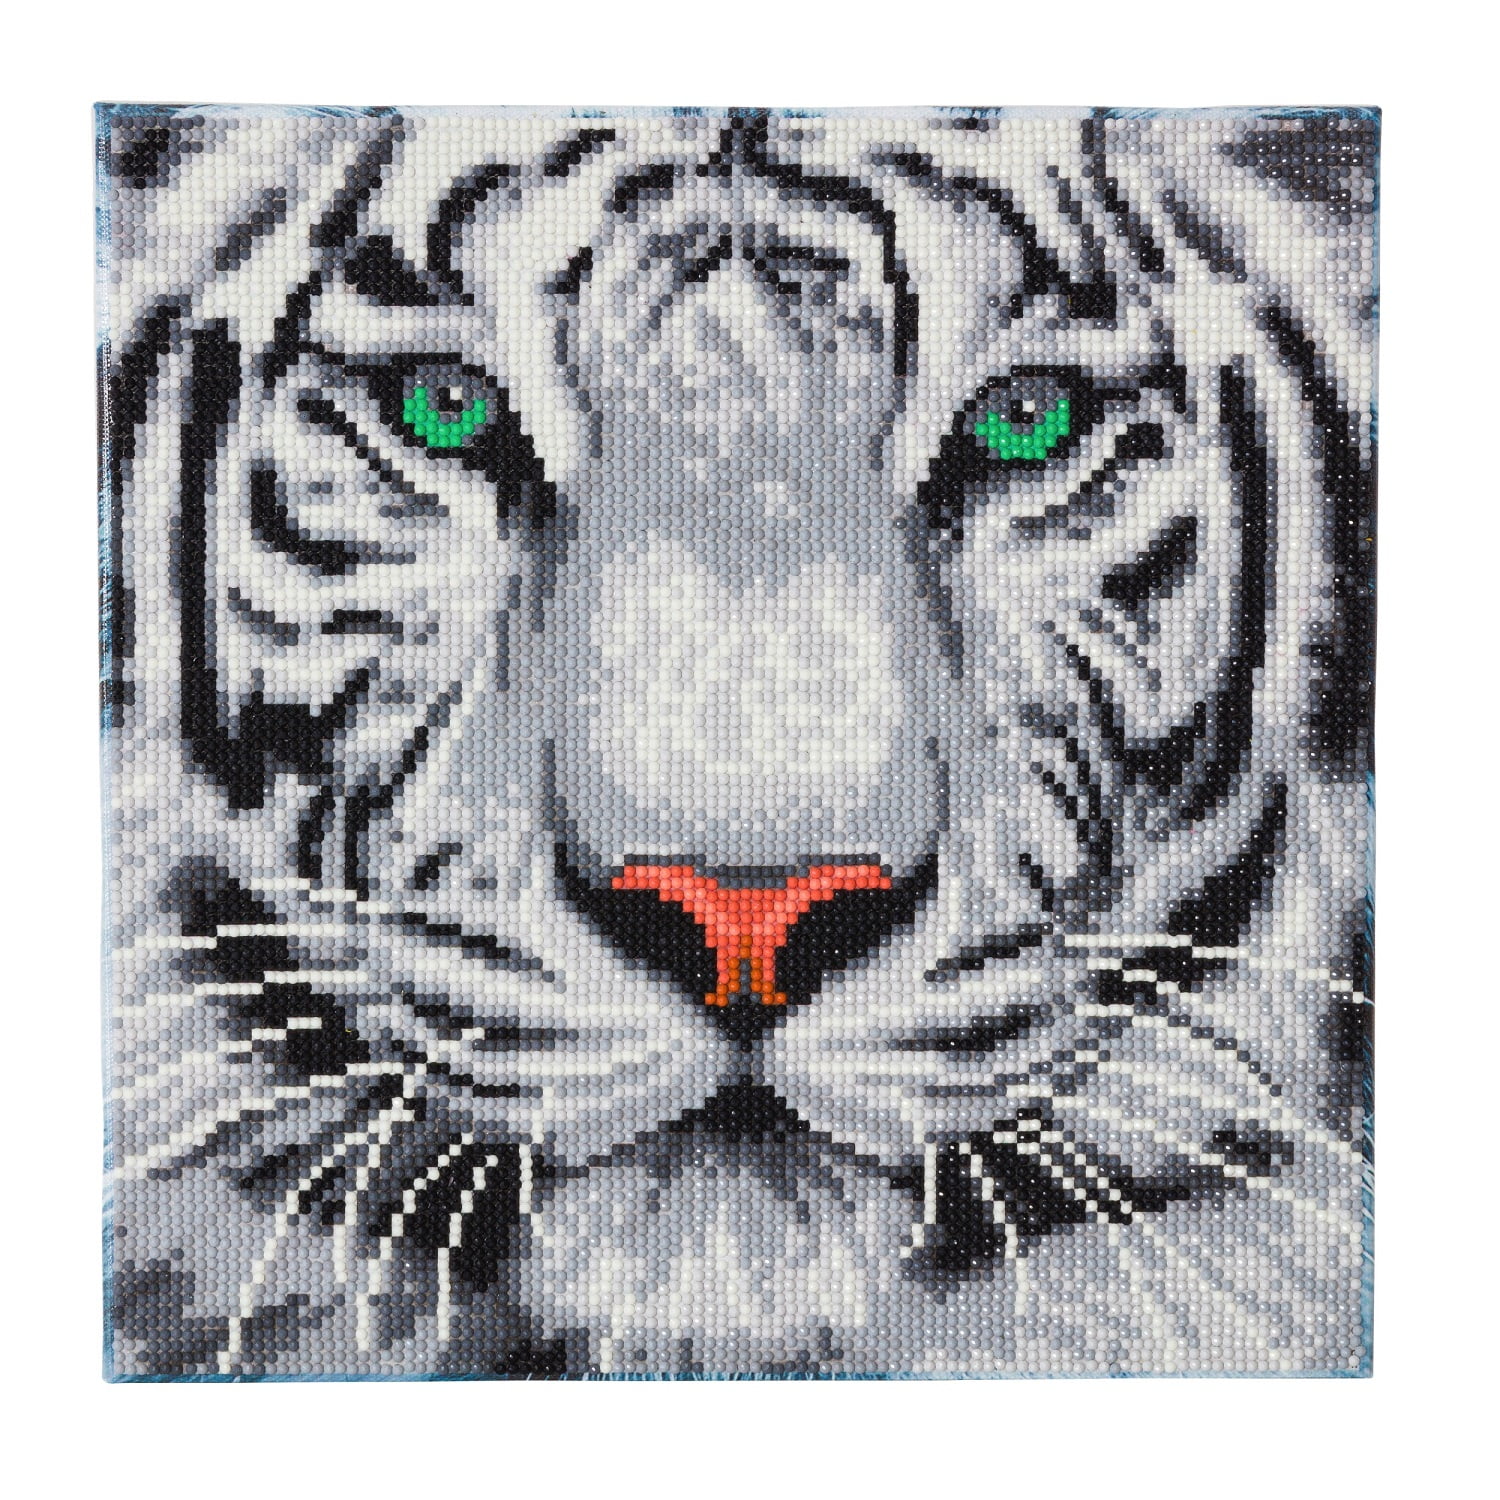 Crystal Art Loving Embrace Framed DIY Diamond Painting Craft Kit, White  Mama Tiger & Cub On Pre-Mounted On Stretched Canvas Wood Frame, XL Size: 65  X